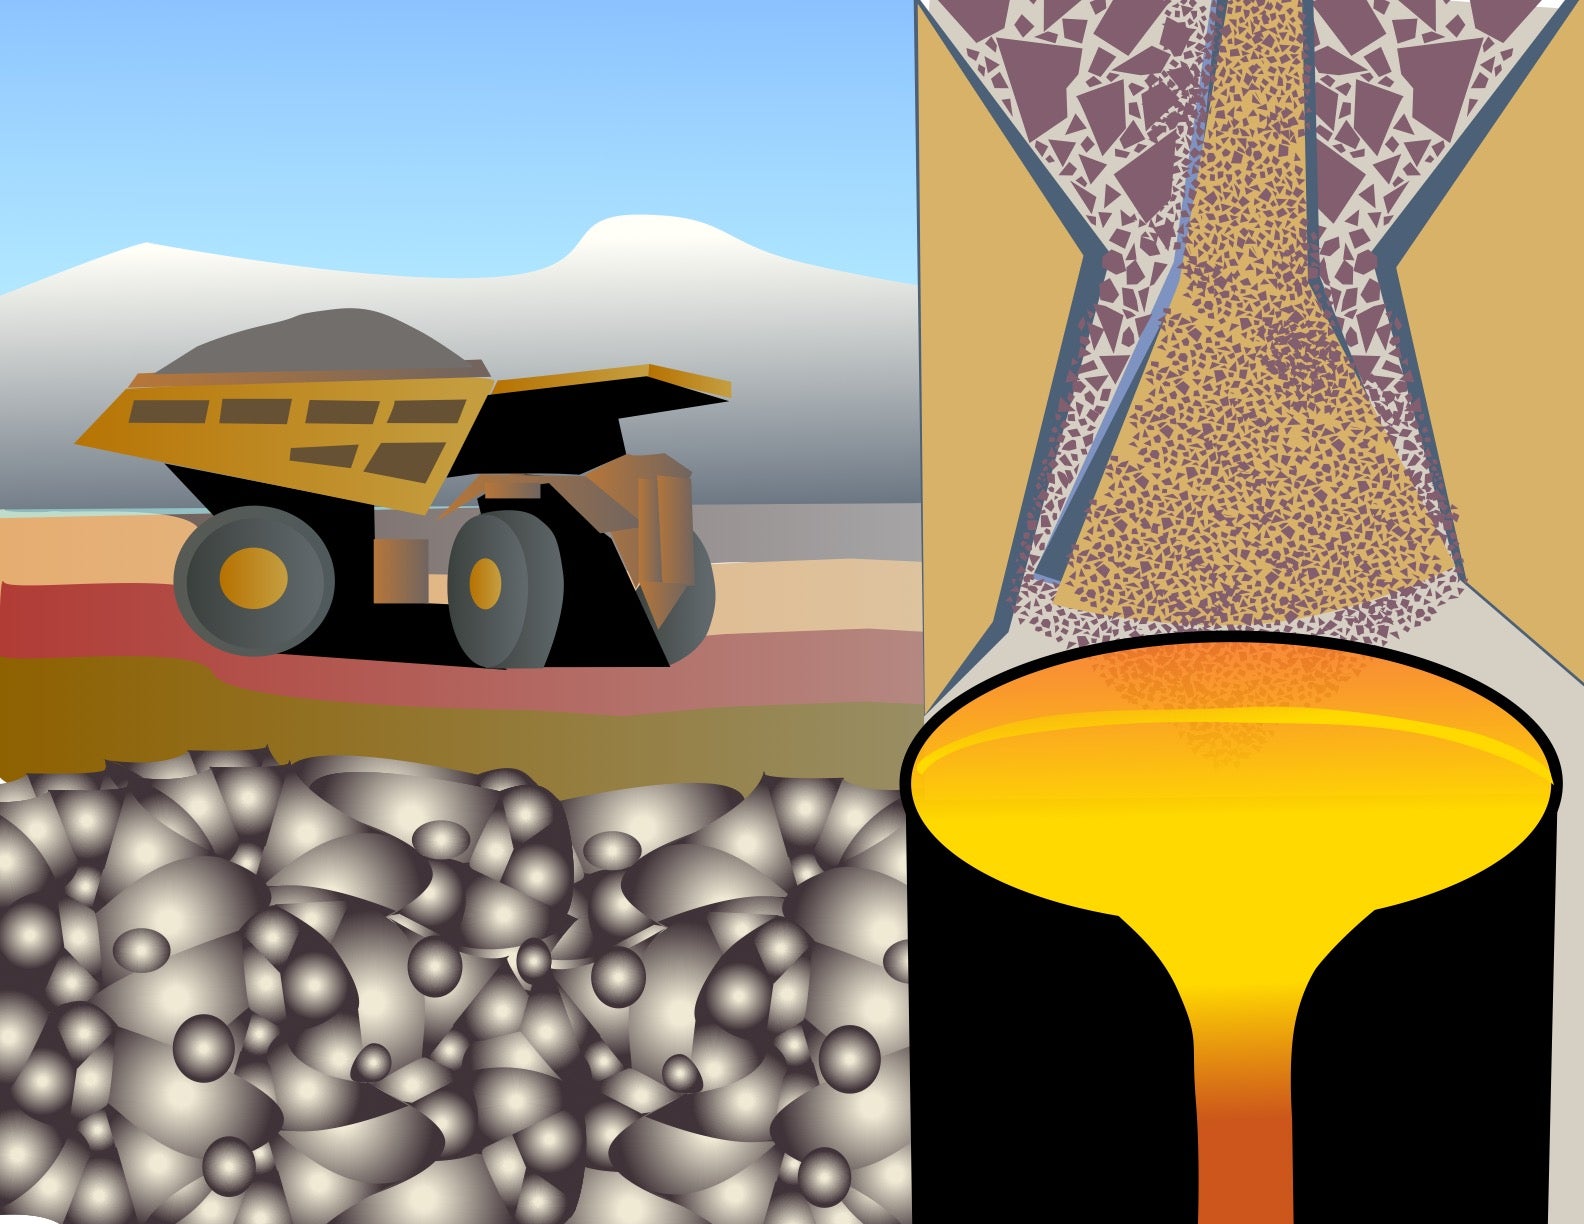 Illustration of a dump truck holding grey rocky material, beside images of rocky materials and geological formations